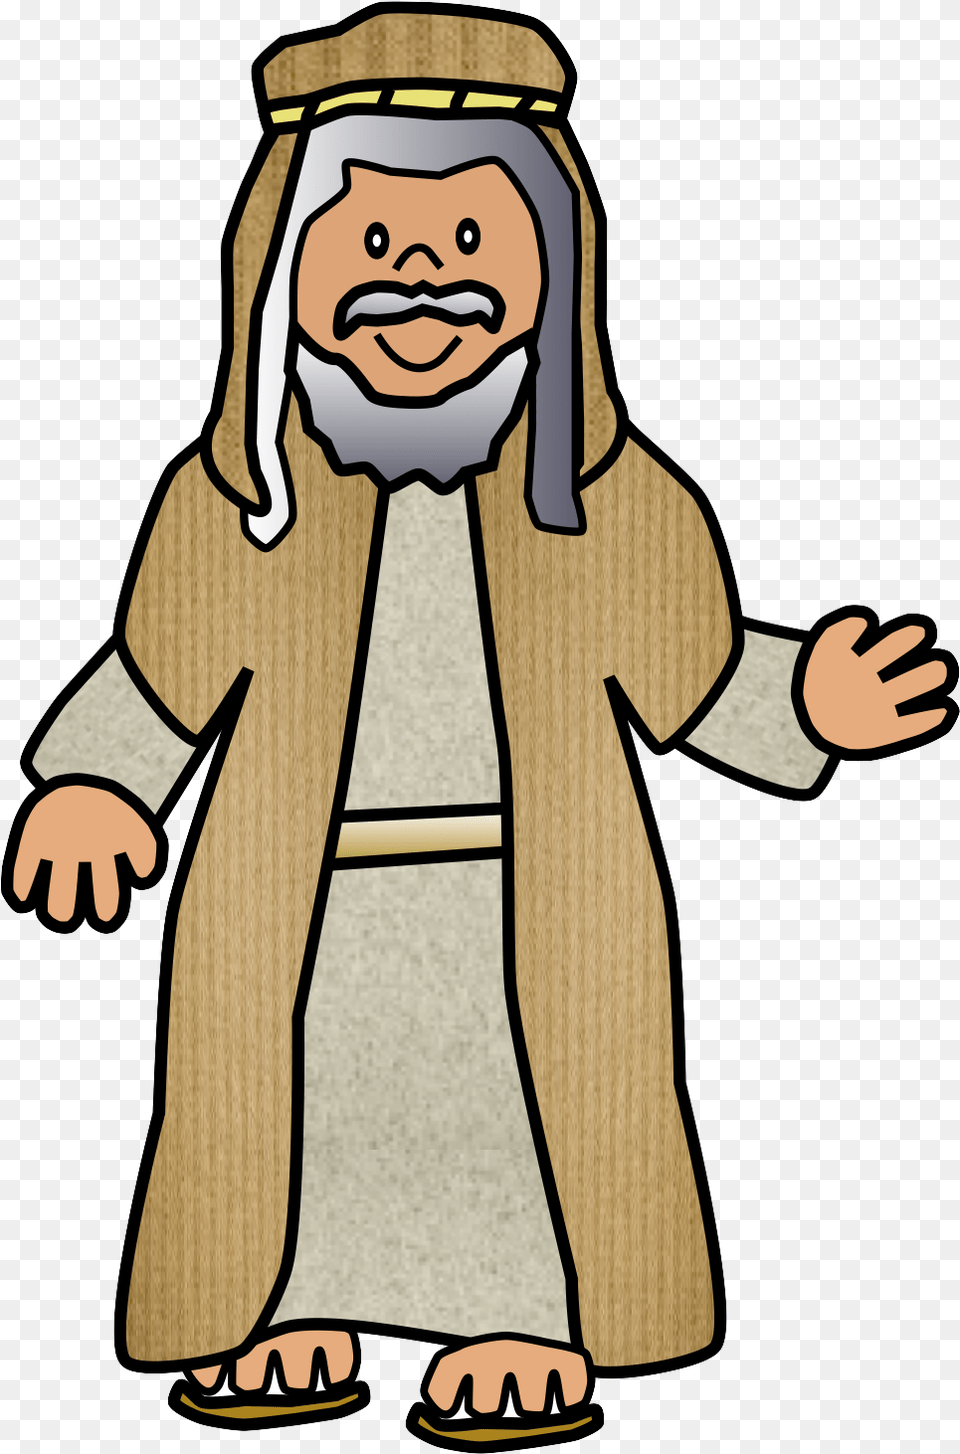 Clip Art Of Characters Cartoon Isaac From The Bible, People, Person, Fashion, Baby Free Transparent Png